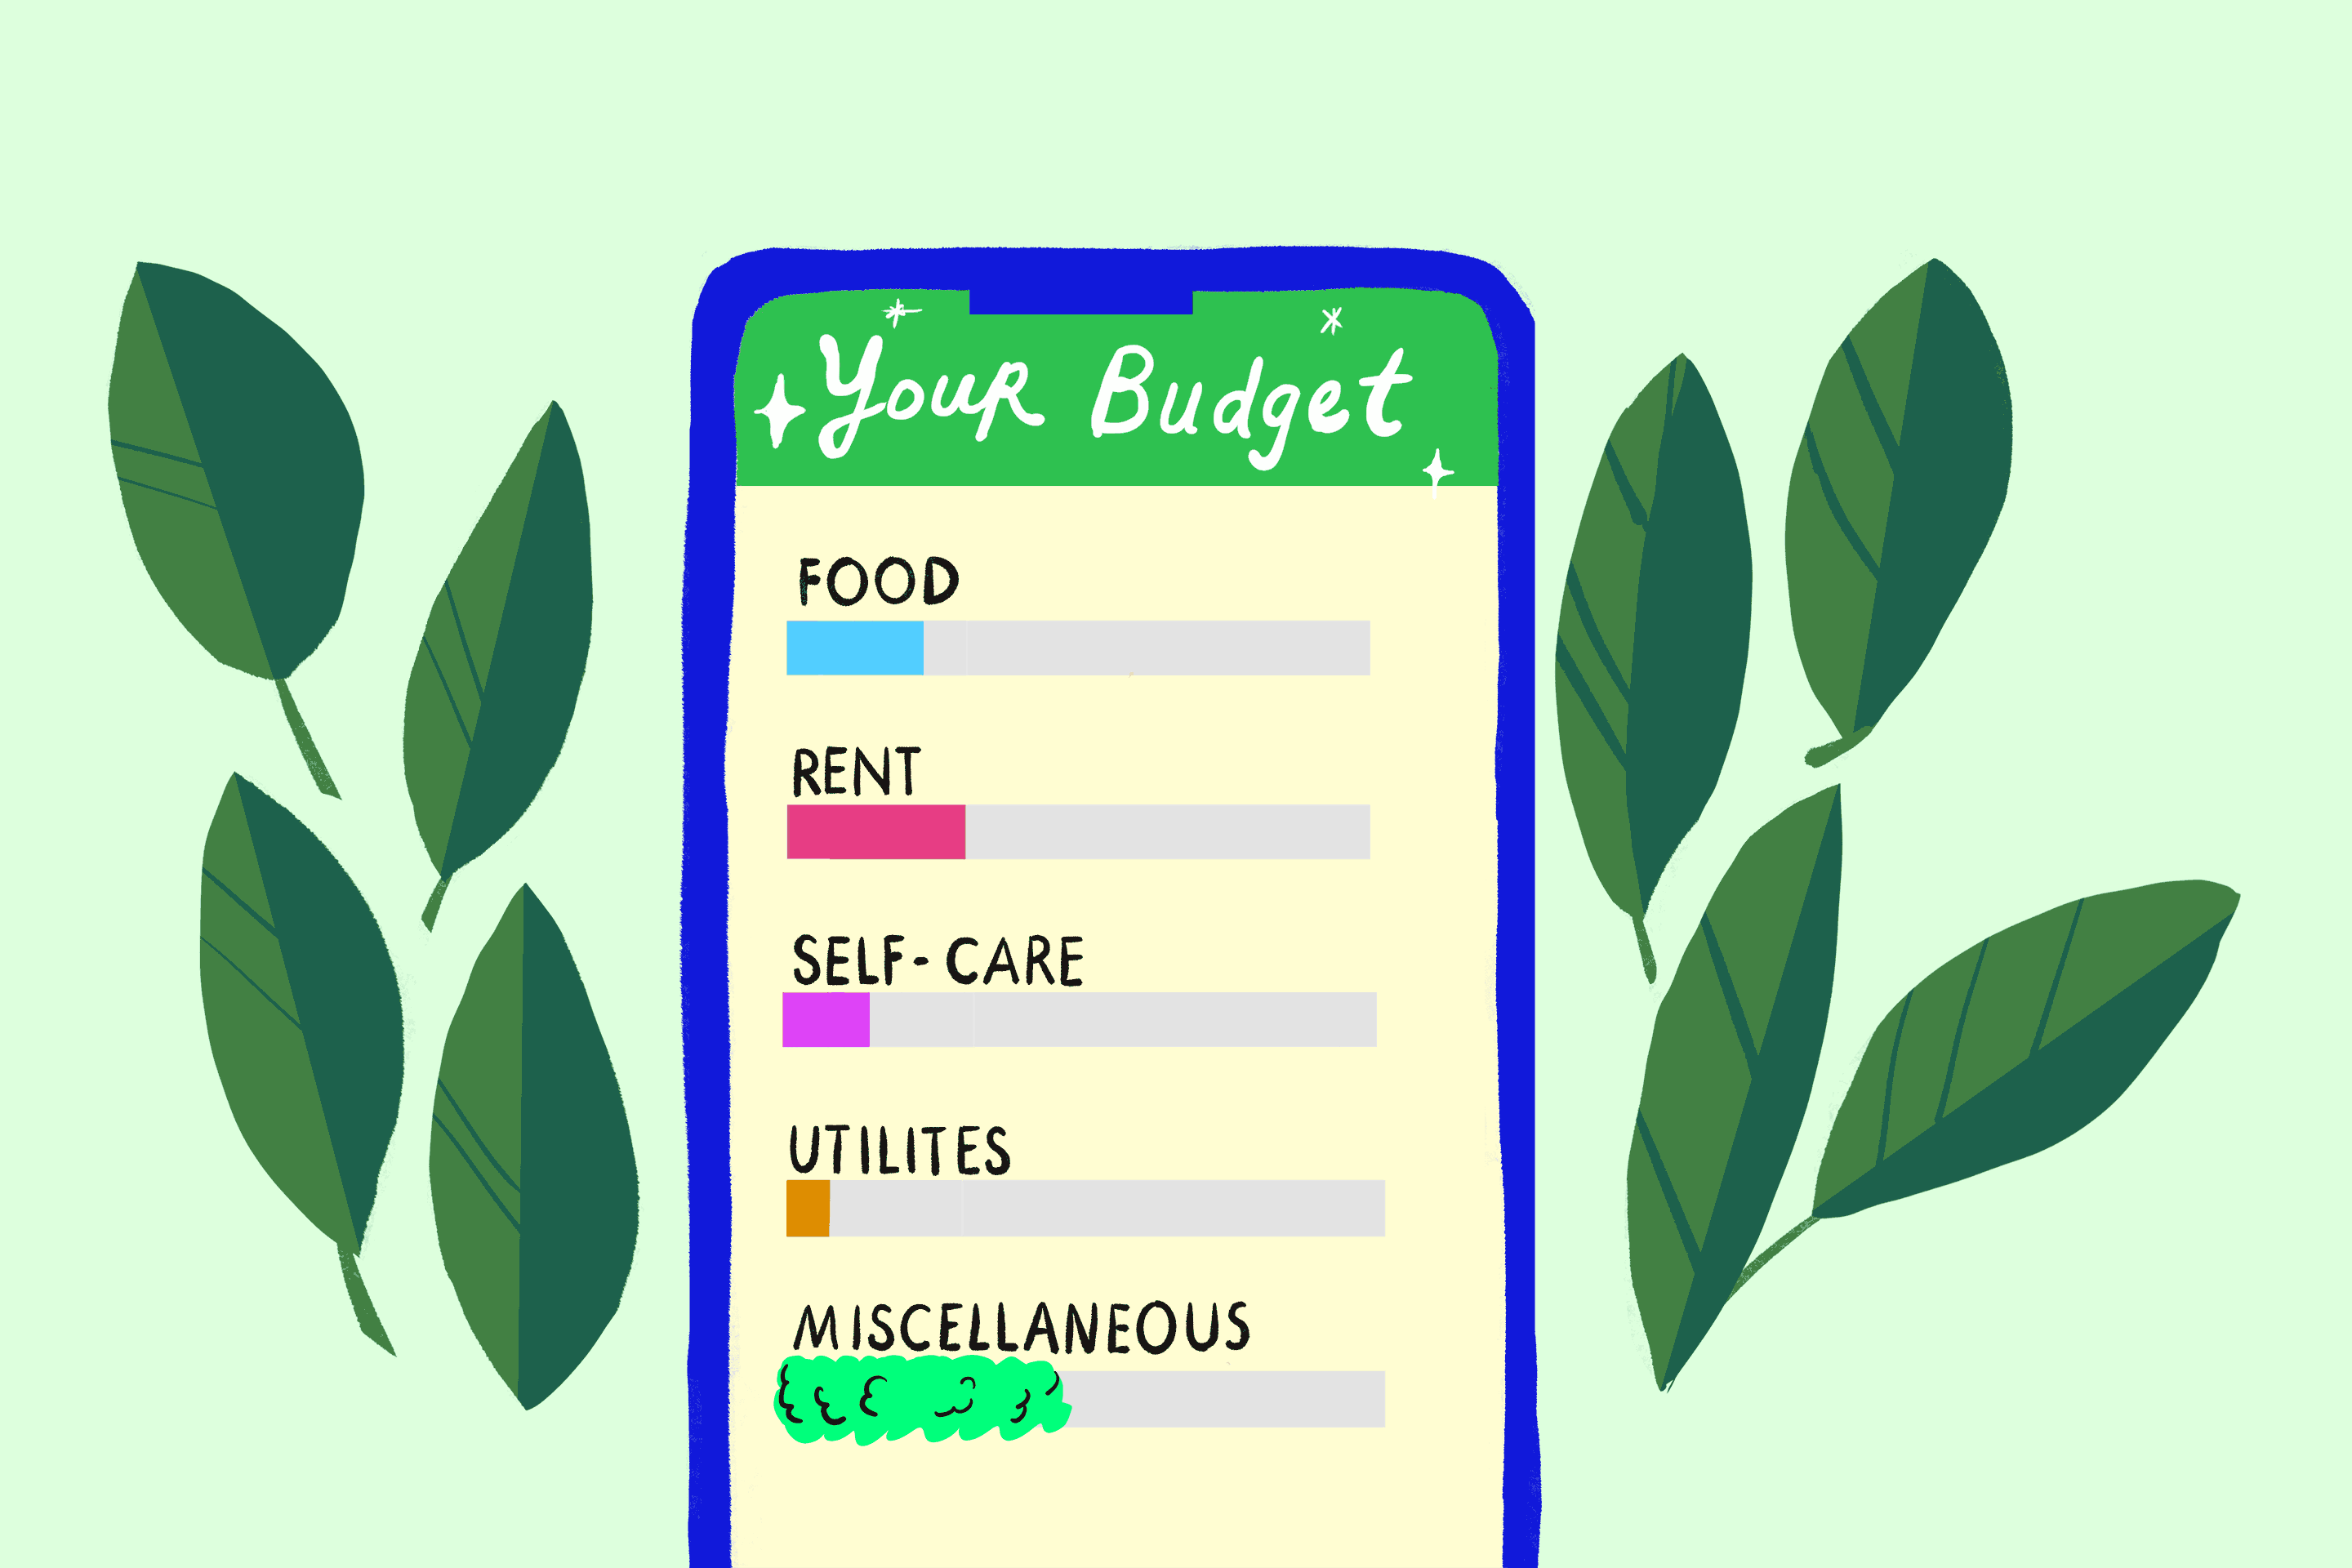 Is Now the Perfect Time to Take the Budgeting App Plunge?